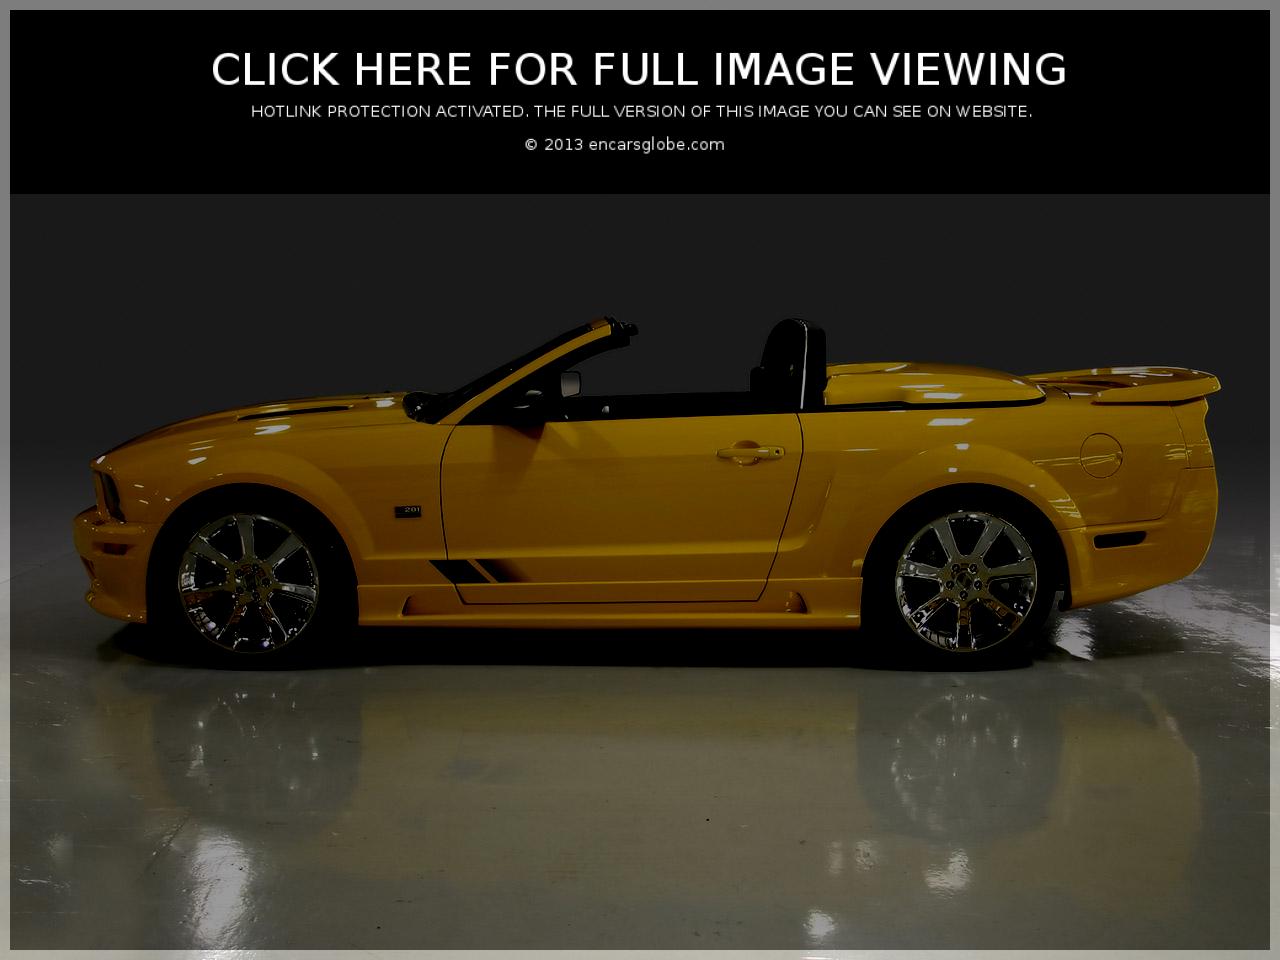 Saleen S281 Speedster Photo Gallery: Photo #01 out of 11, Image ...